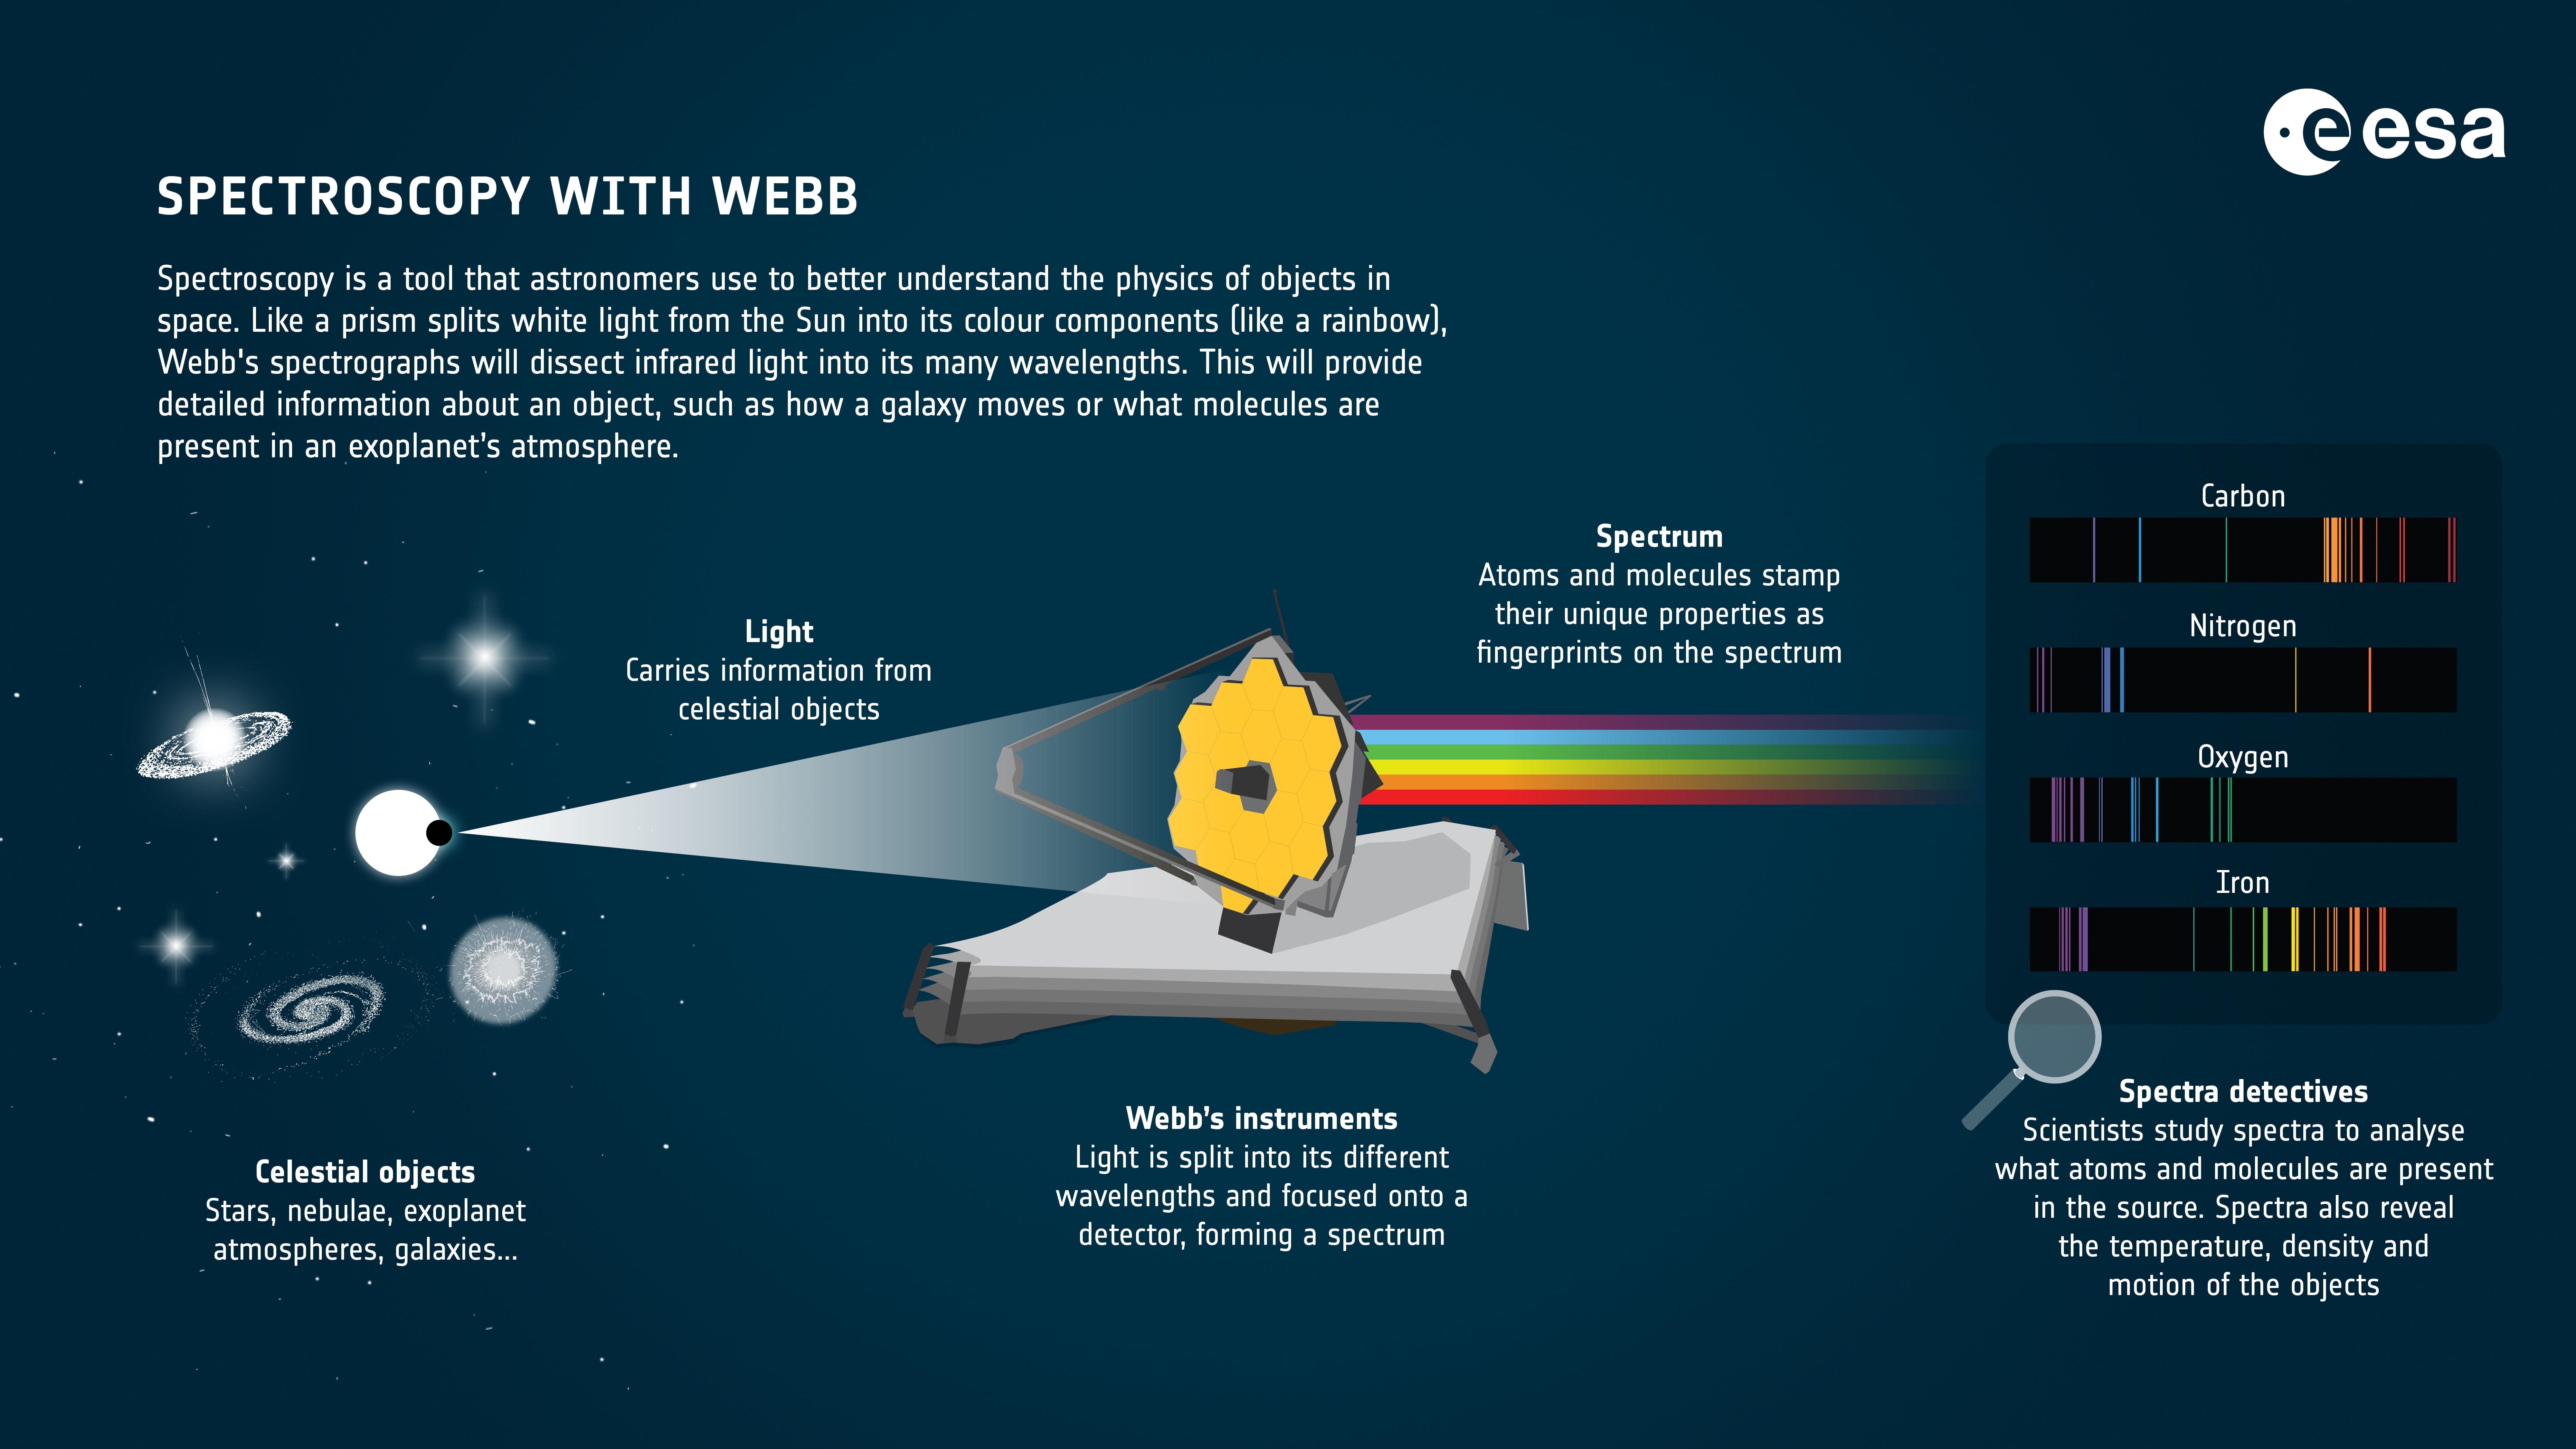 Spectrographs, such as NIRSpec, separate incoming stellar light into the spectra, allowing scientists to see the nature of stars.